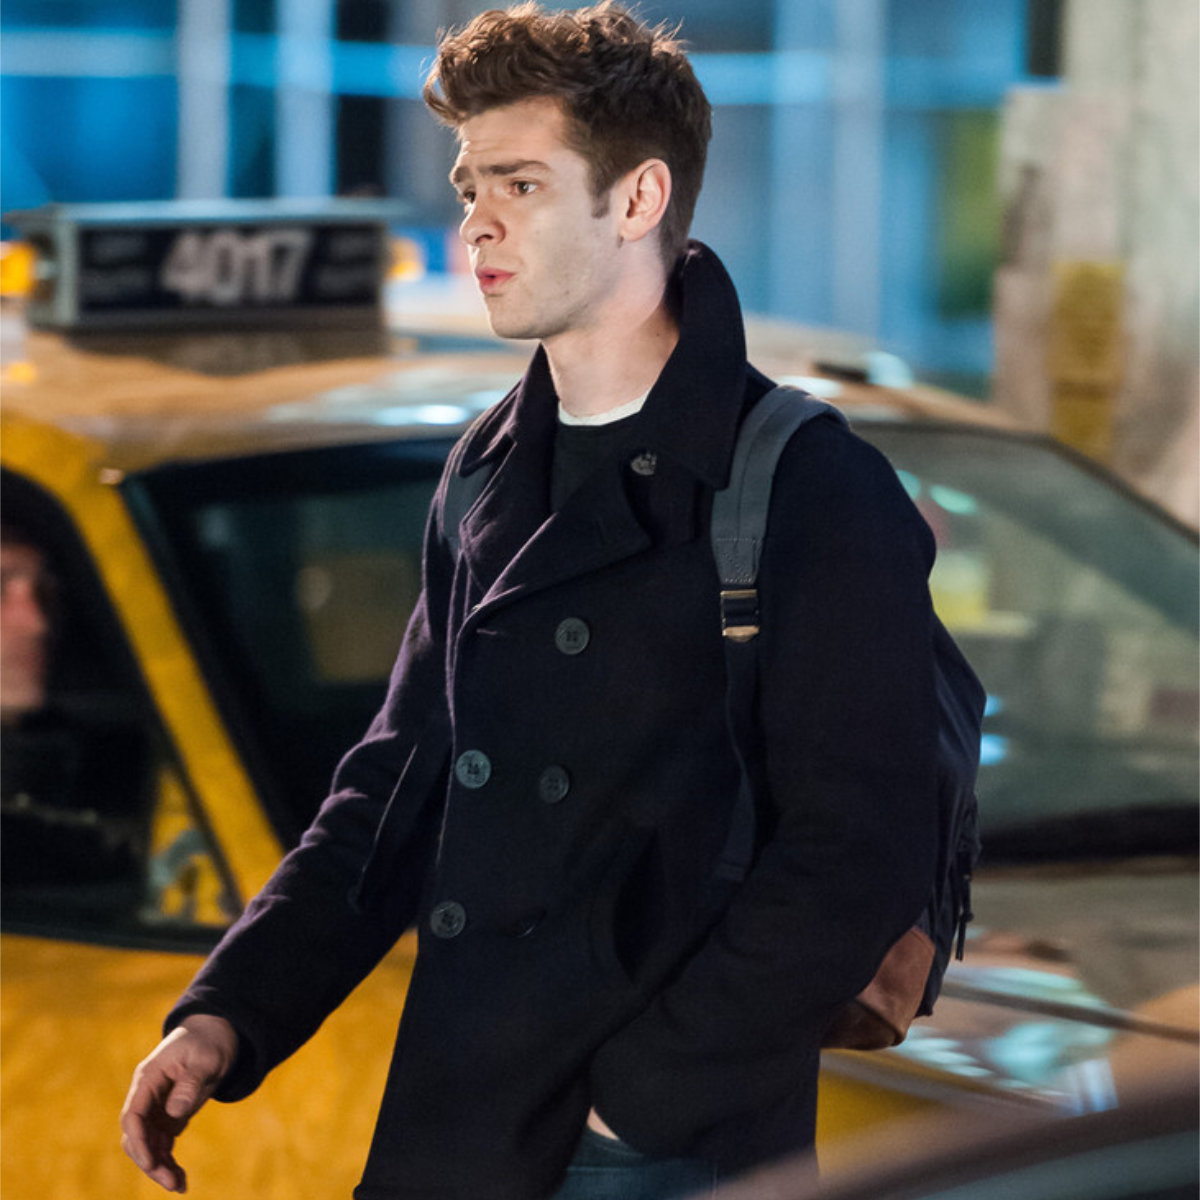 More Evidence Appears Of Andrew Garfield In Spider-Man: No Way Home ...